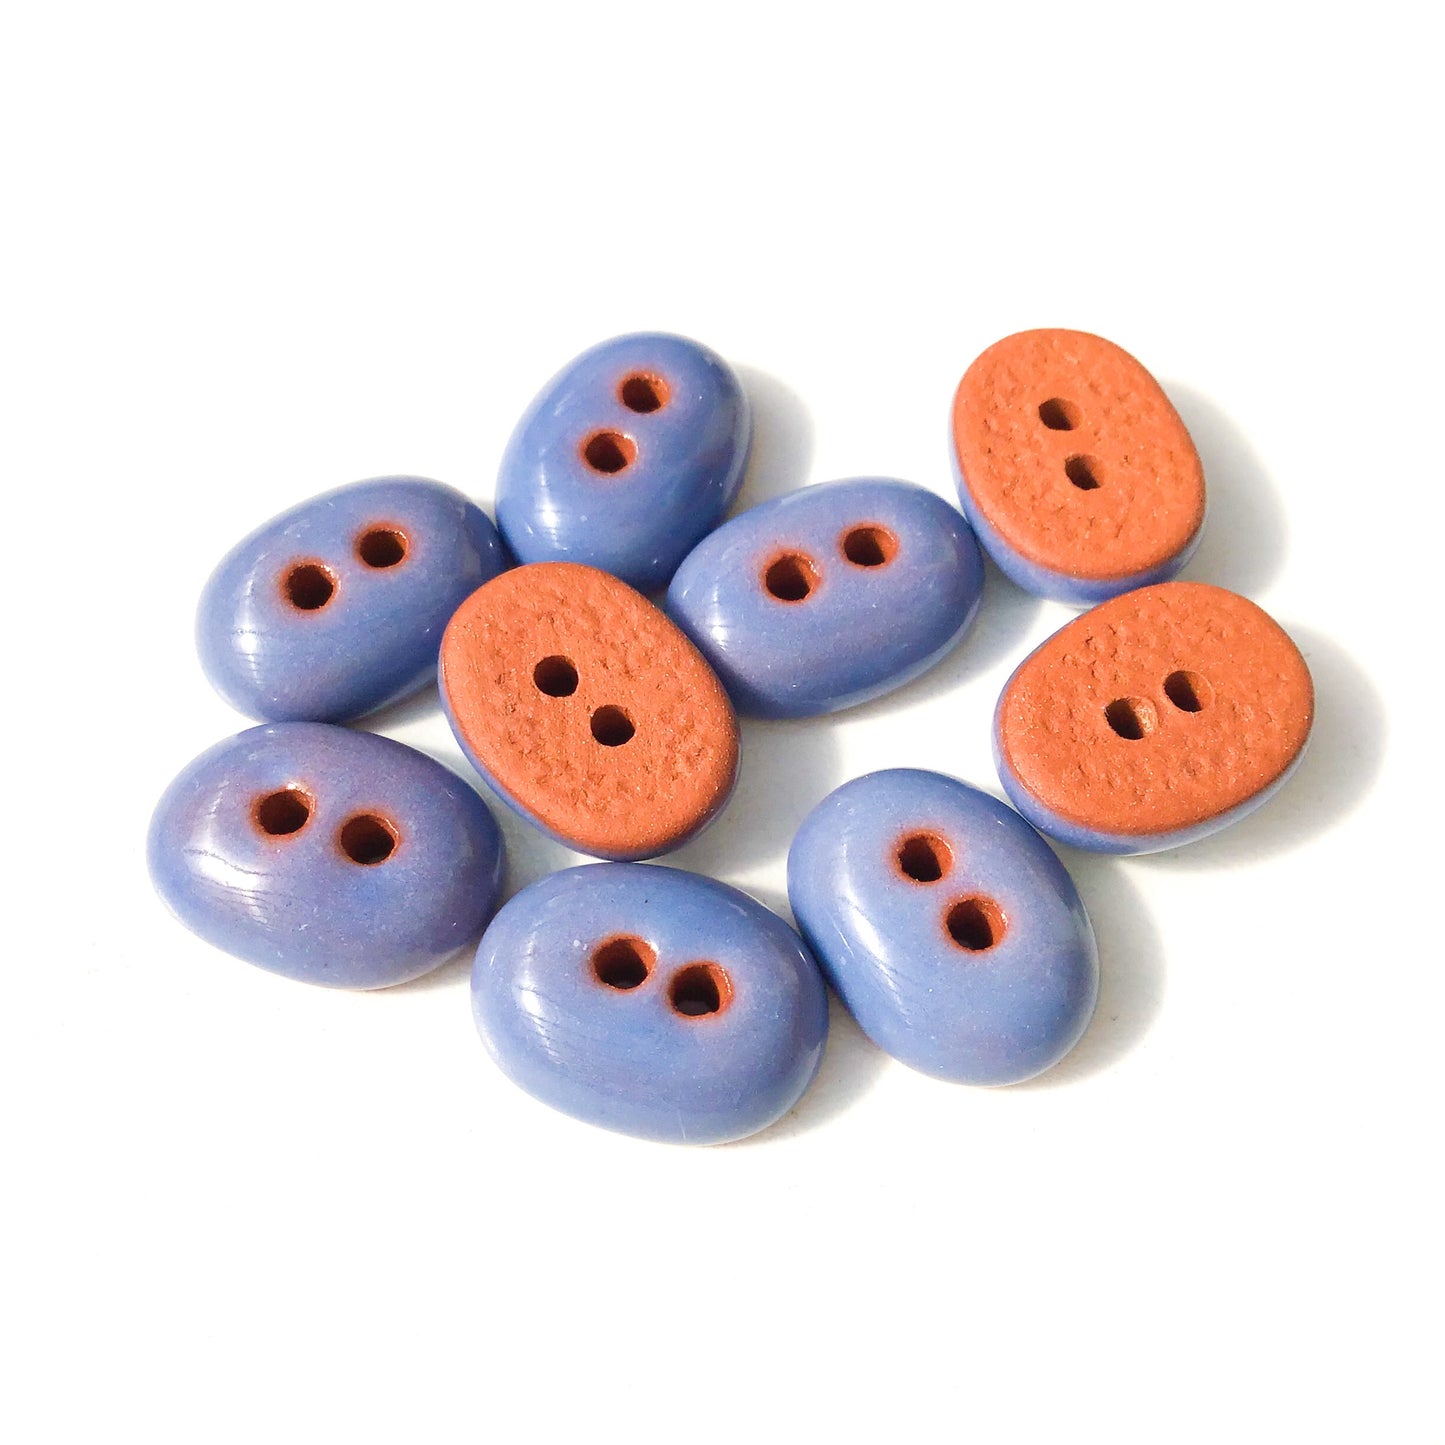 Hazy Bluish-Purple Oval Clay Buttons - Purple Clay Buttons - 7/16" x 9/16" - 9 Pack